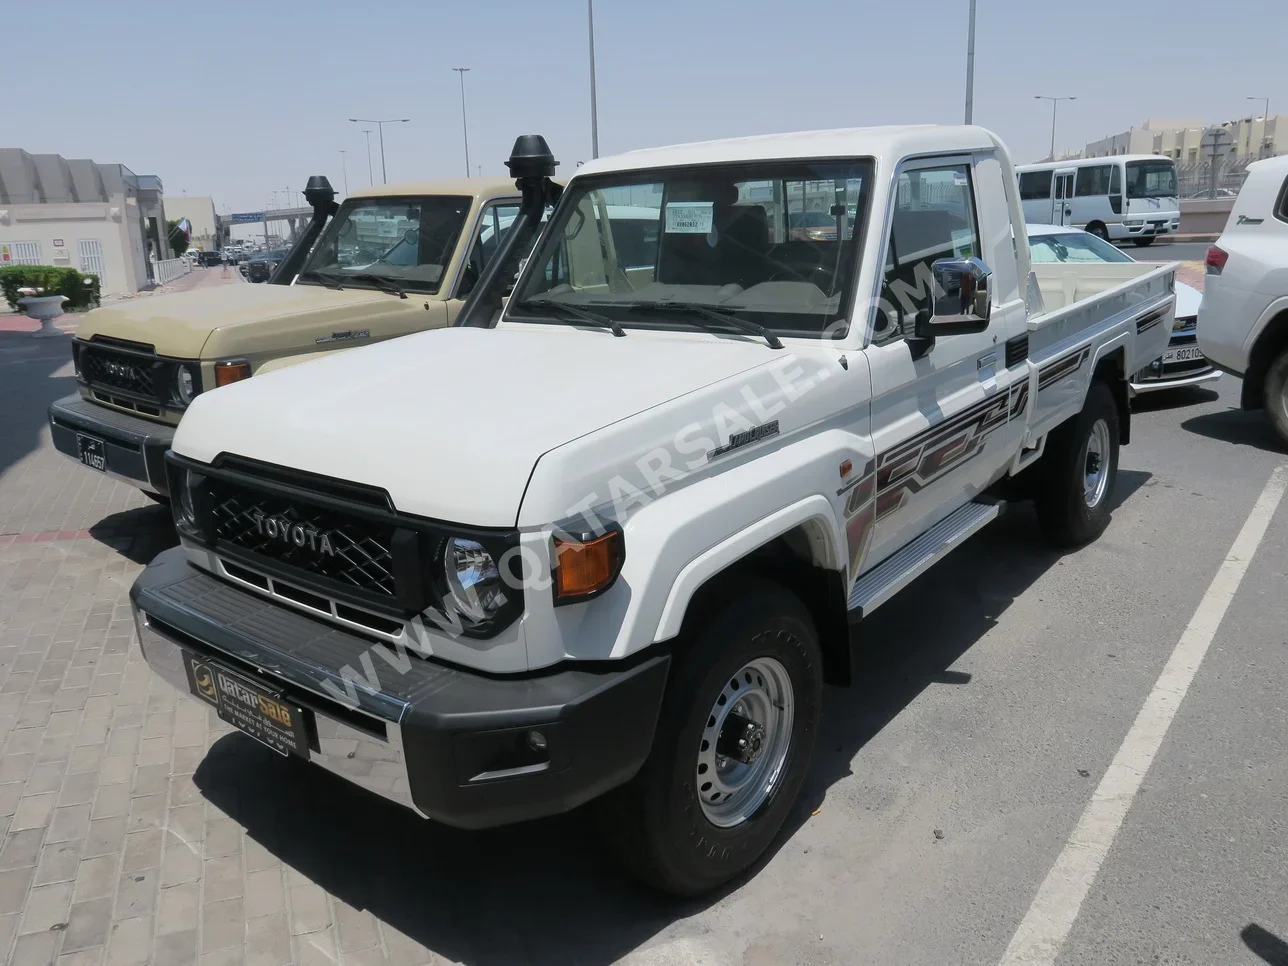 Toyota  Land Cruiser  LX  2024  Manual  0 Km  6 Cylinder  Four Wheel Drive (4WD)  Pick Up  White  With Warranty